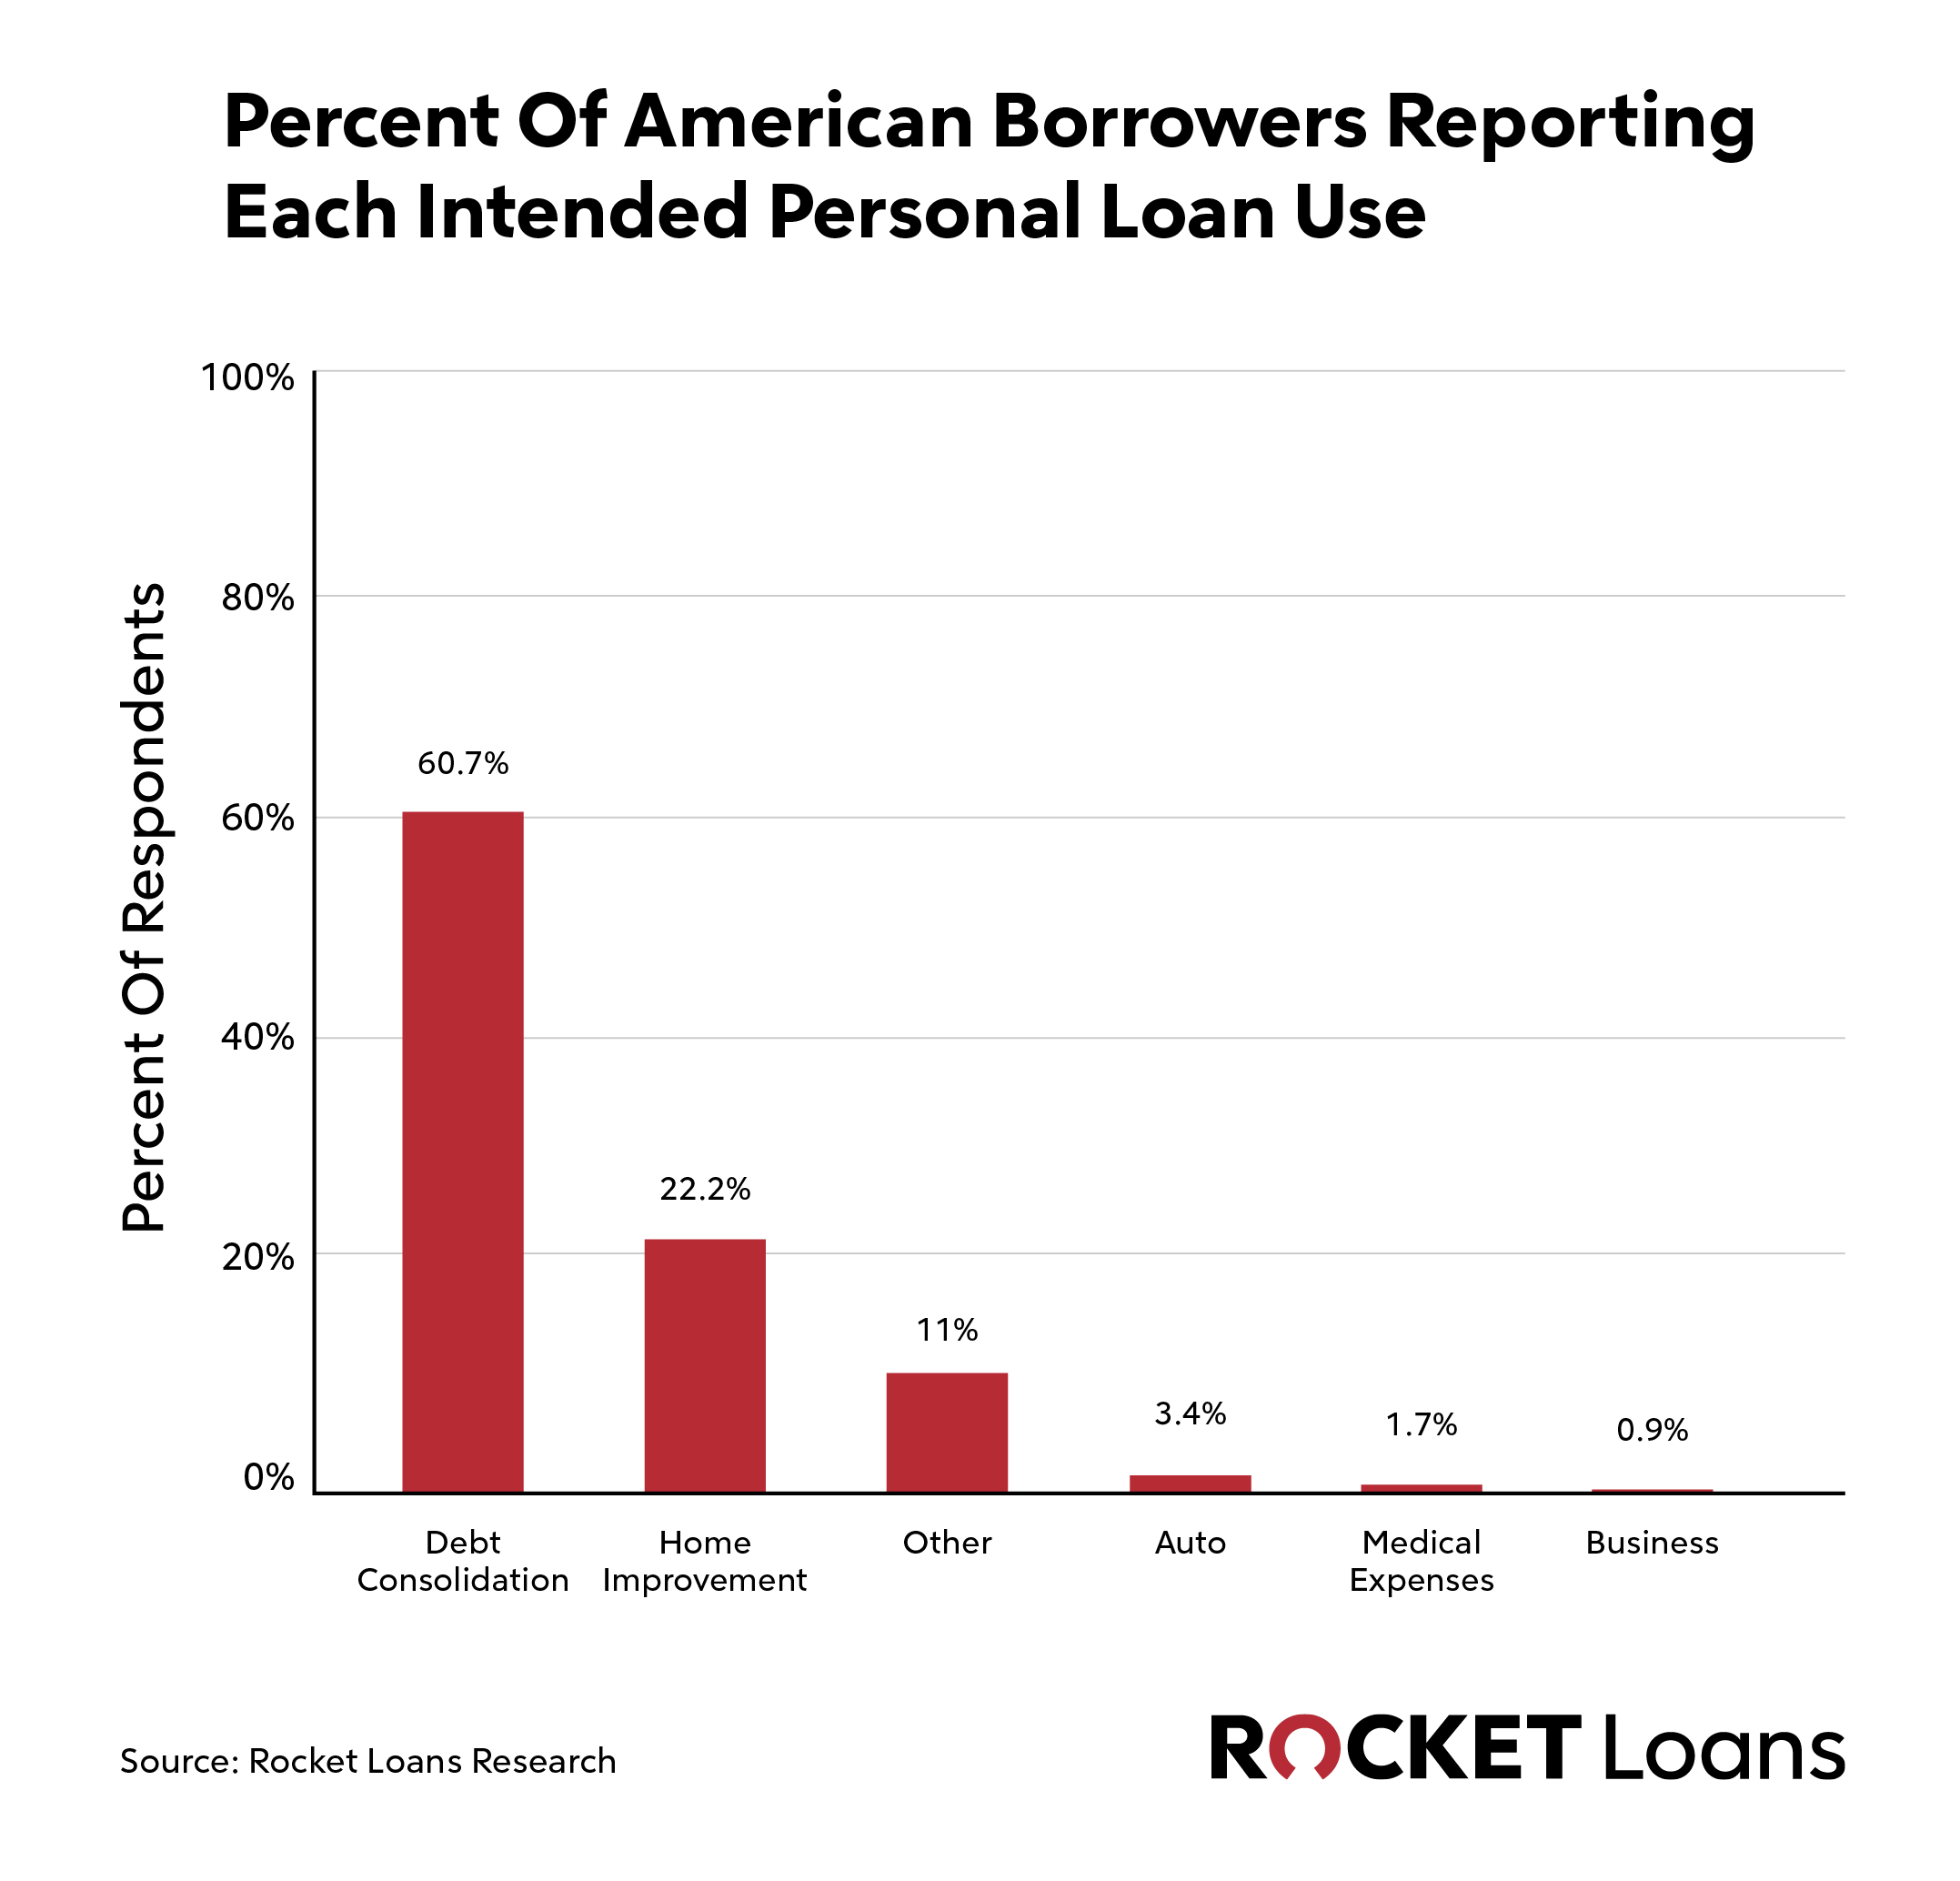 Graph results of "Percent of American Borrowers Reporting Each Intendend Personal Loan Use".